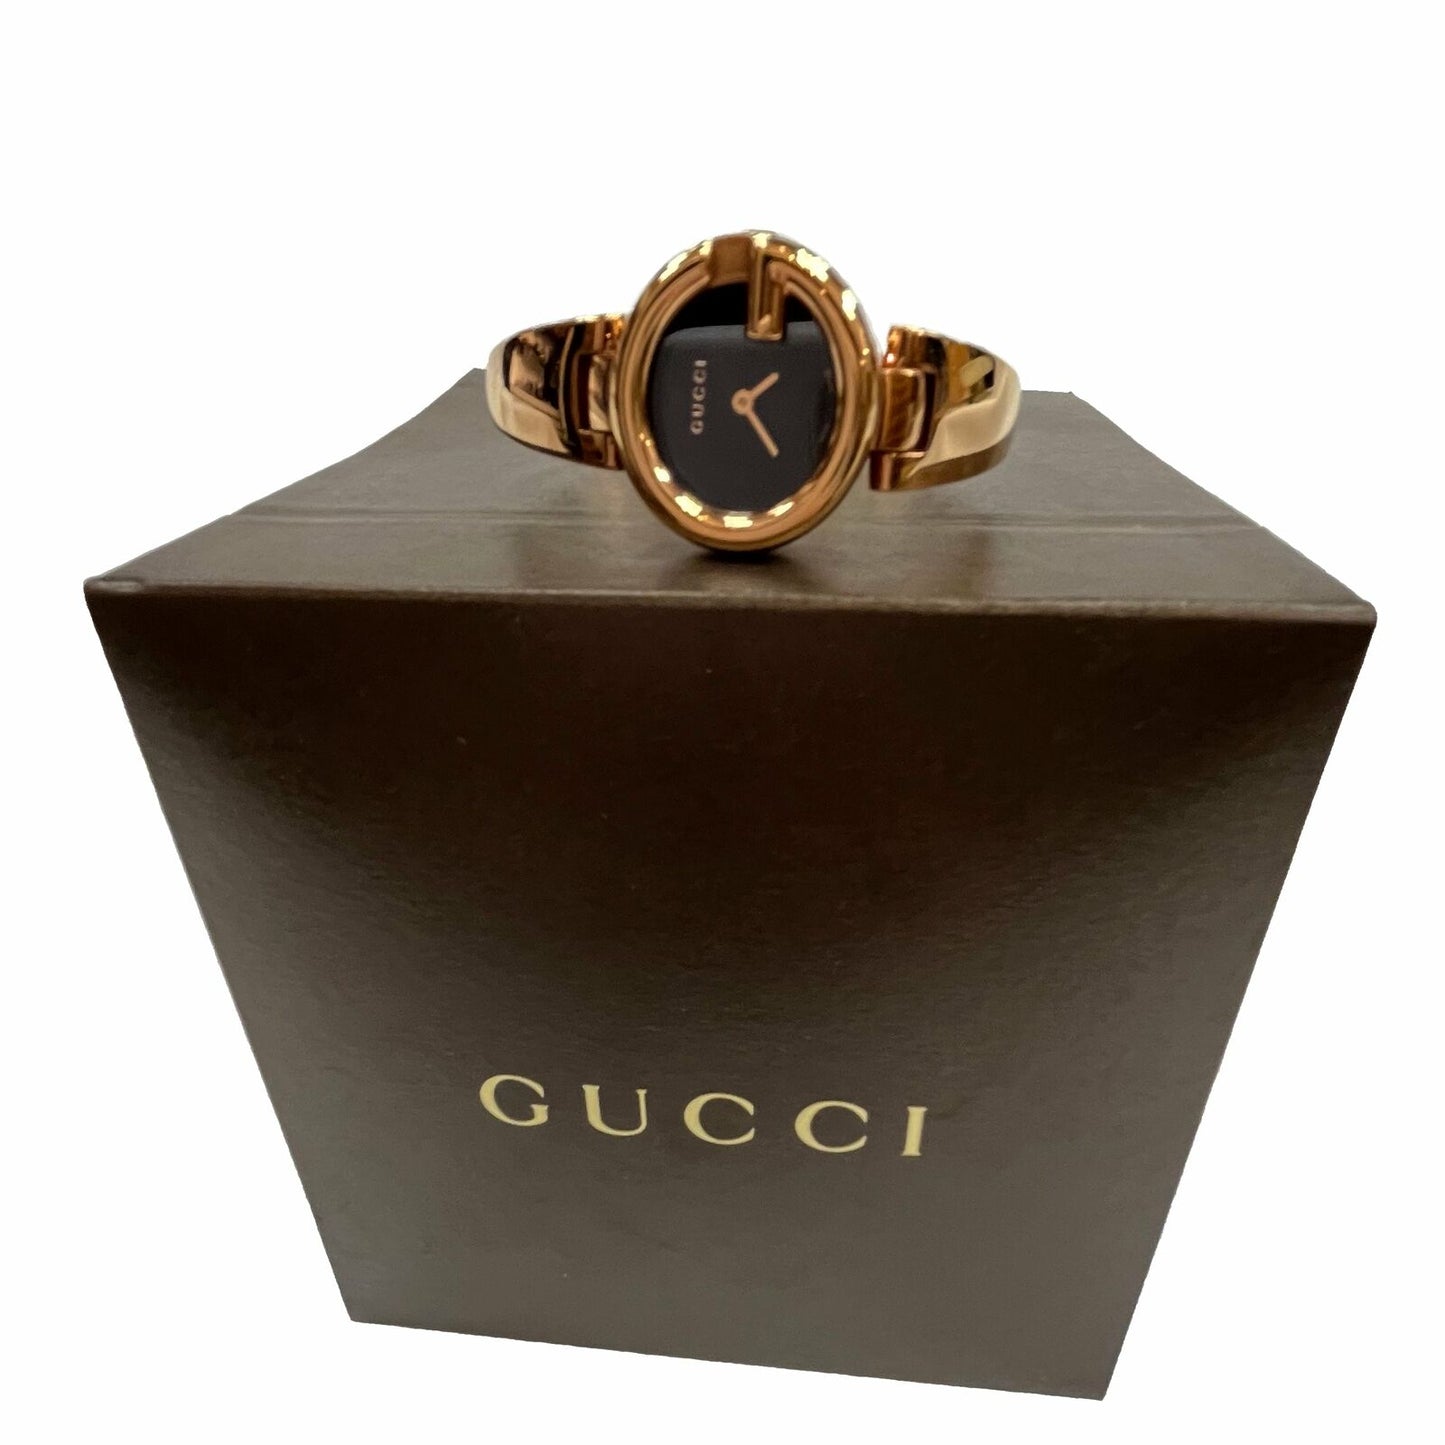 GUCCI Ladies Watch Rose Gold